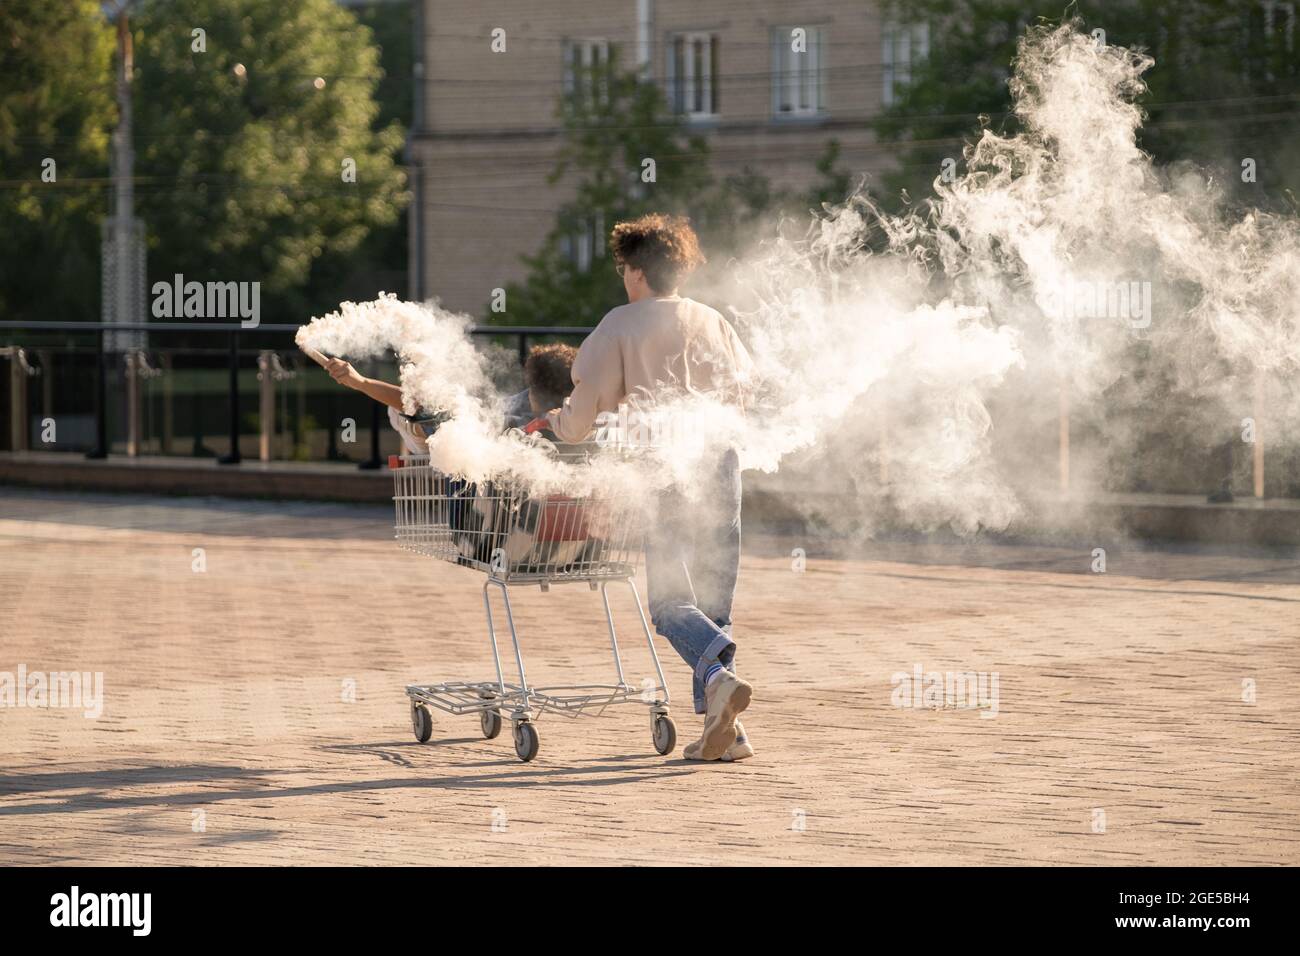 Ecstatic teenage dates having fun with firecrackers while guy pushing shopping cart with his girlfriend Stock Photo